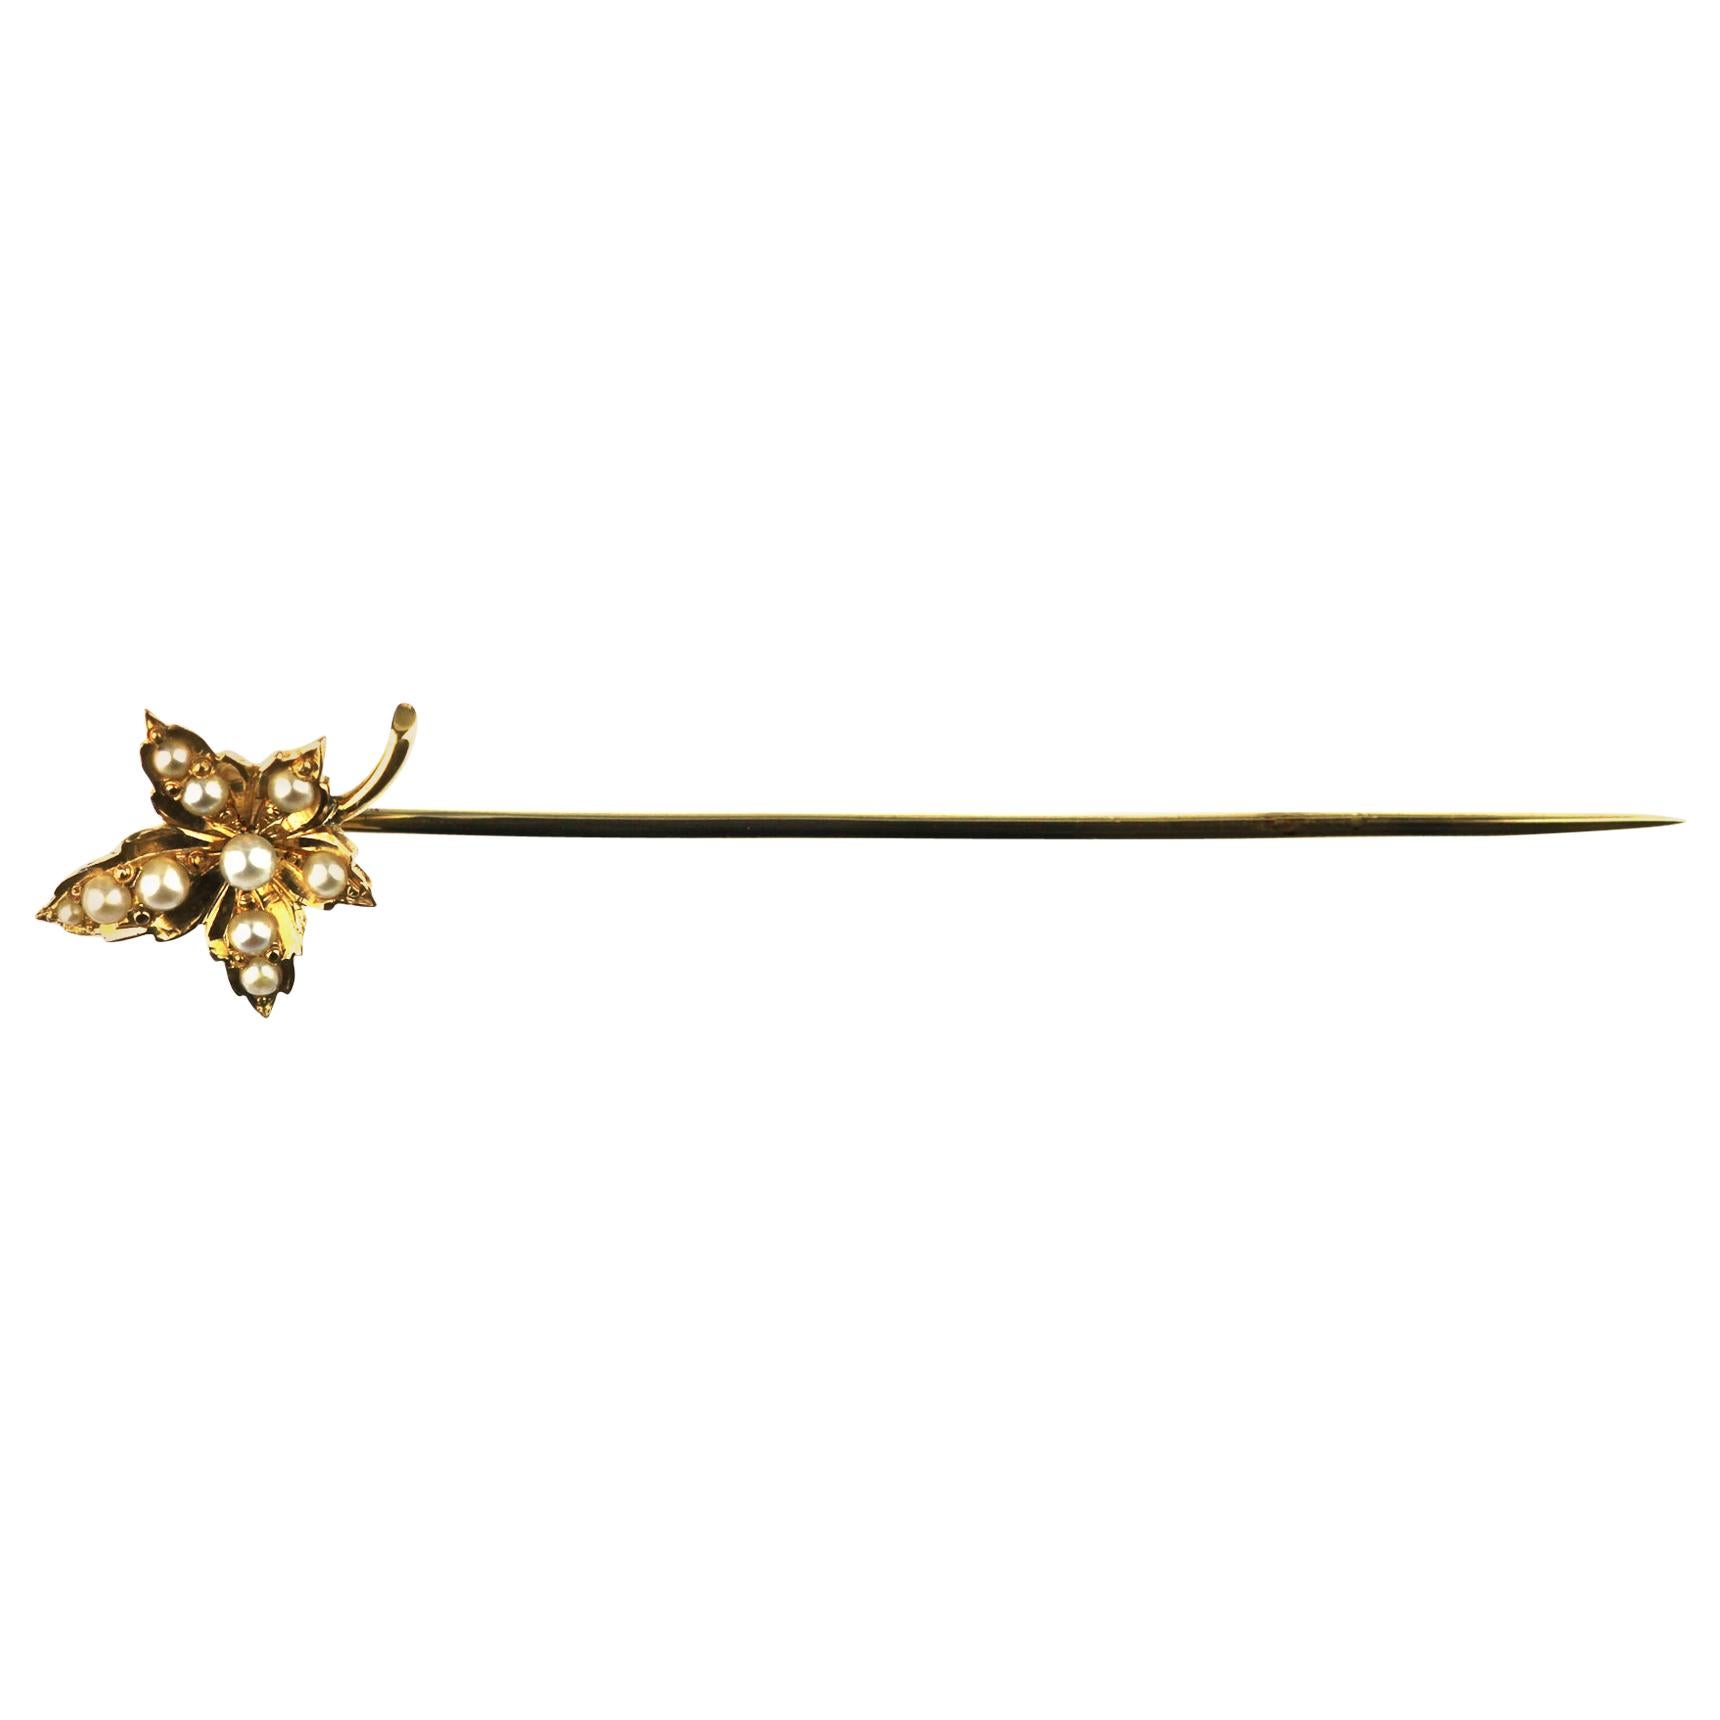 Antique Autumn/Maple Leaf Stick/Tie Pin with Natural Pearls in 14/15 Carat Gold